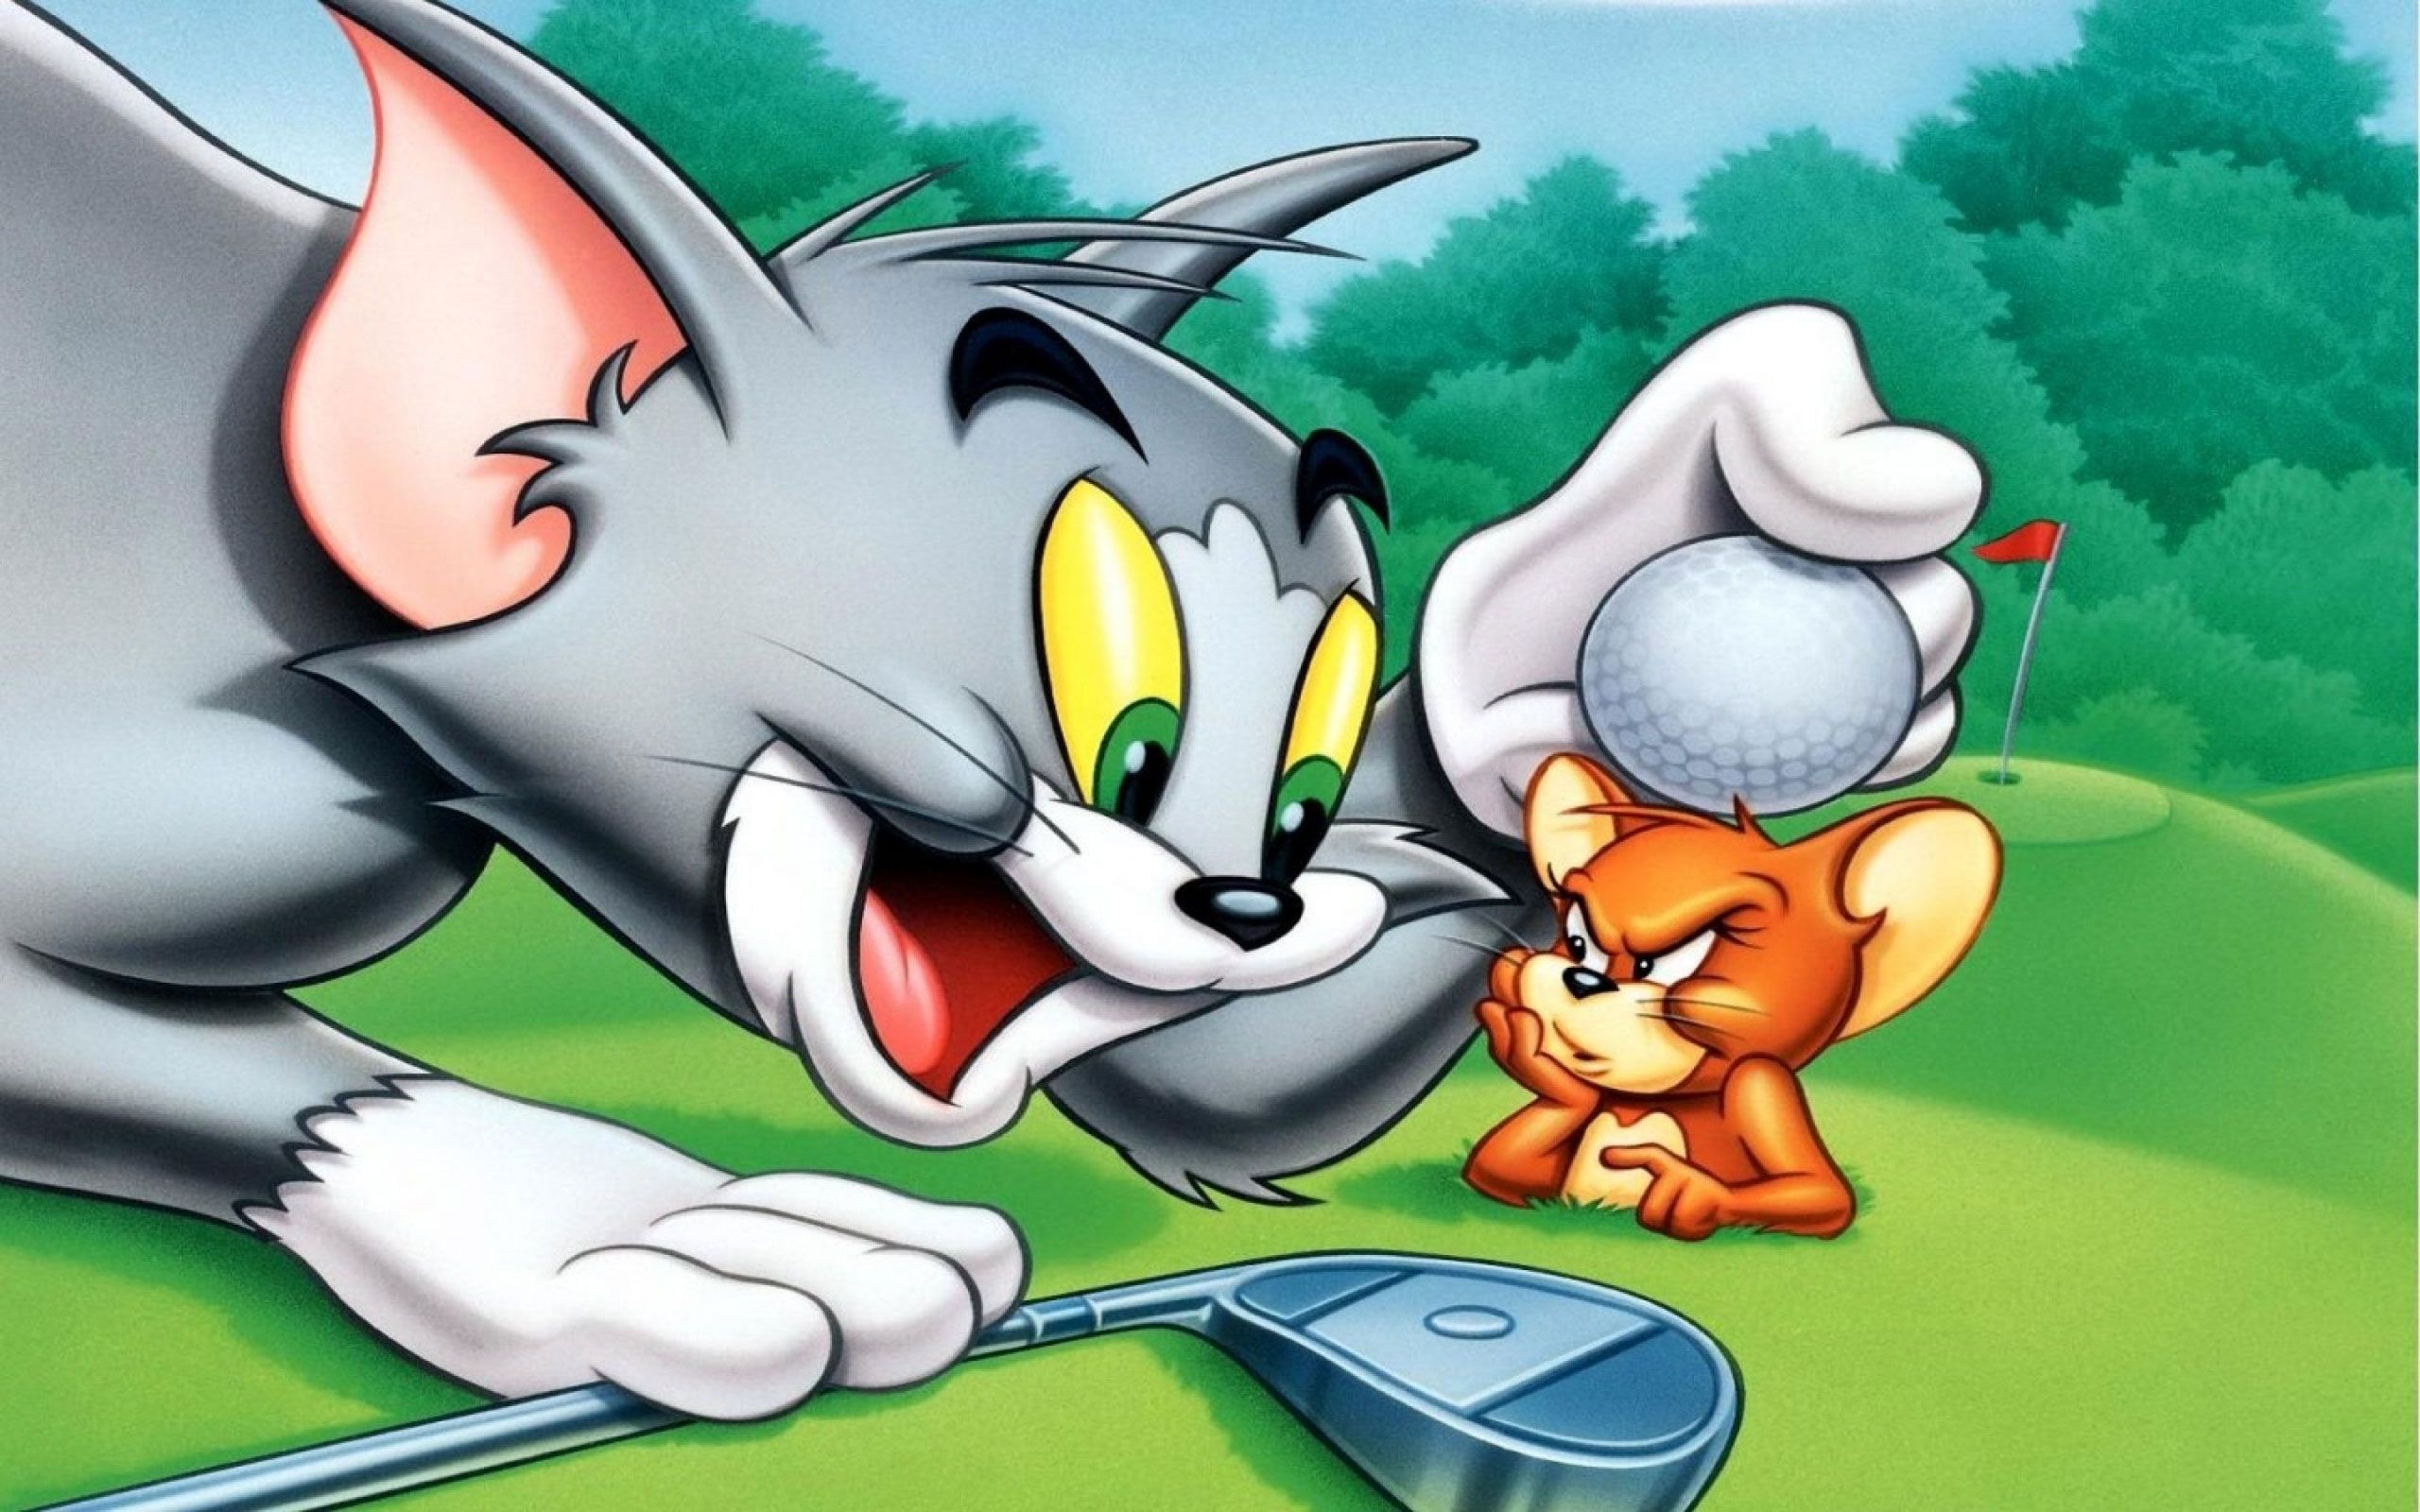 Tom and Jerry 3D Cartoon Wallpaper HD Backgrounds